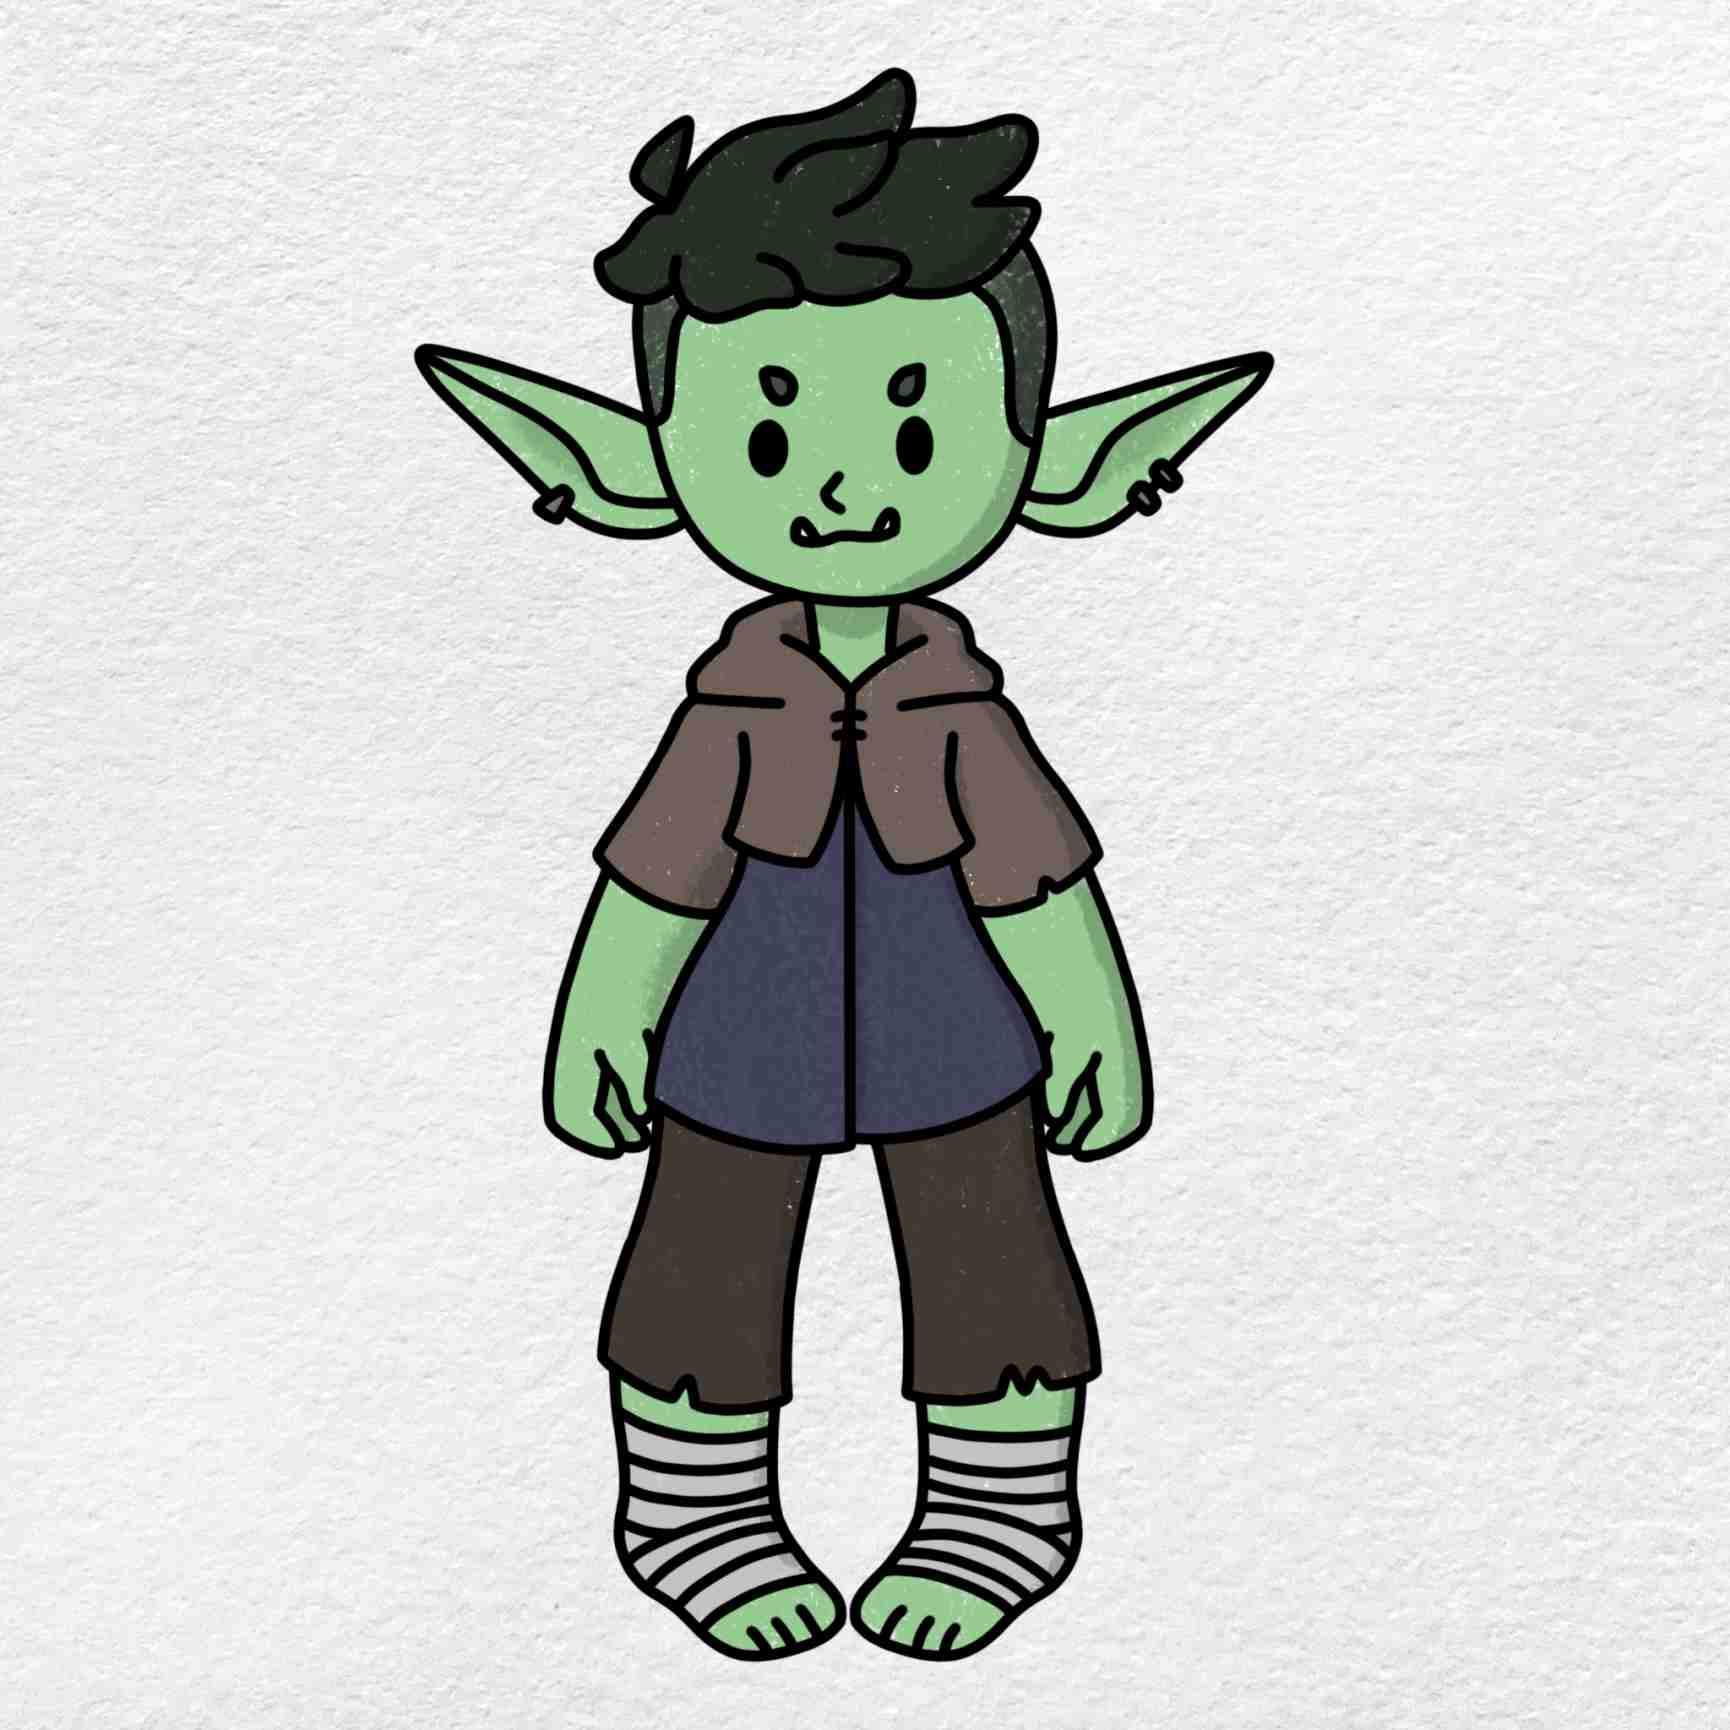 How to draw a goblin